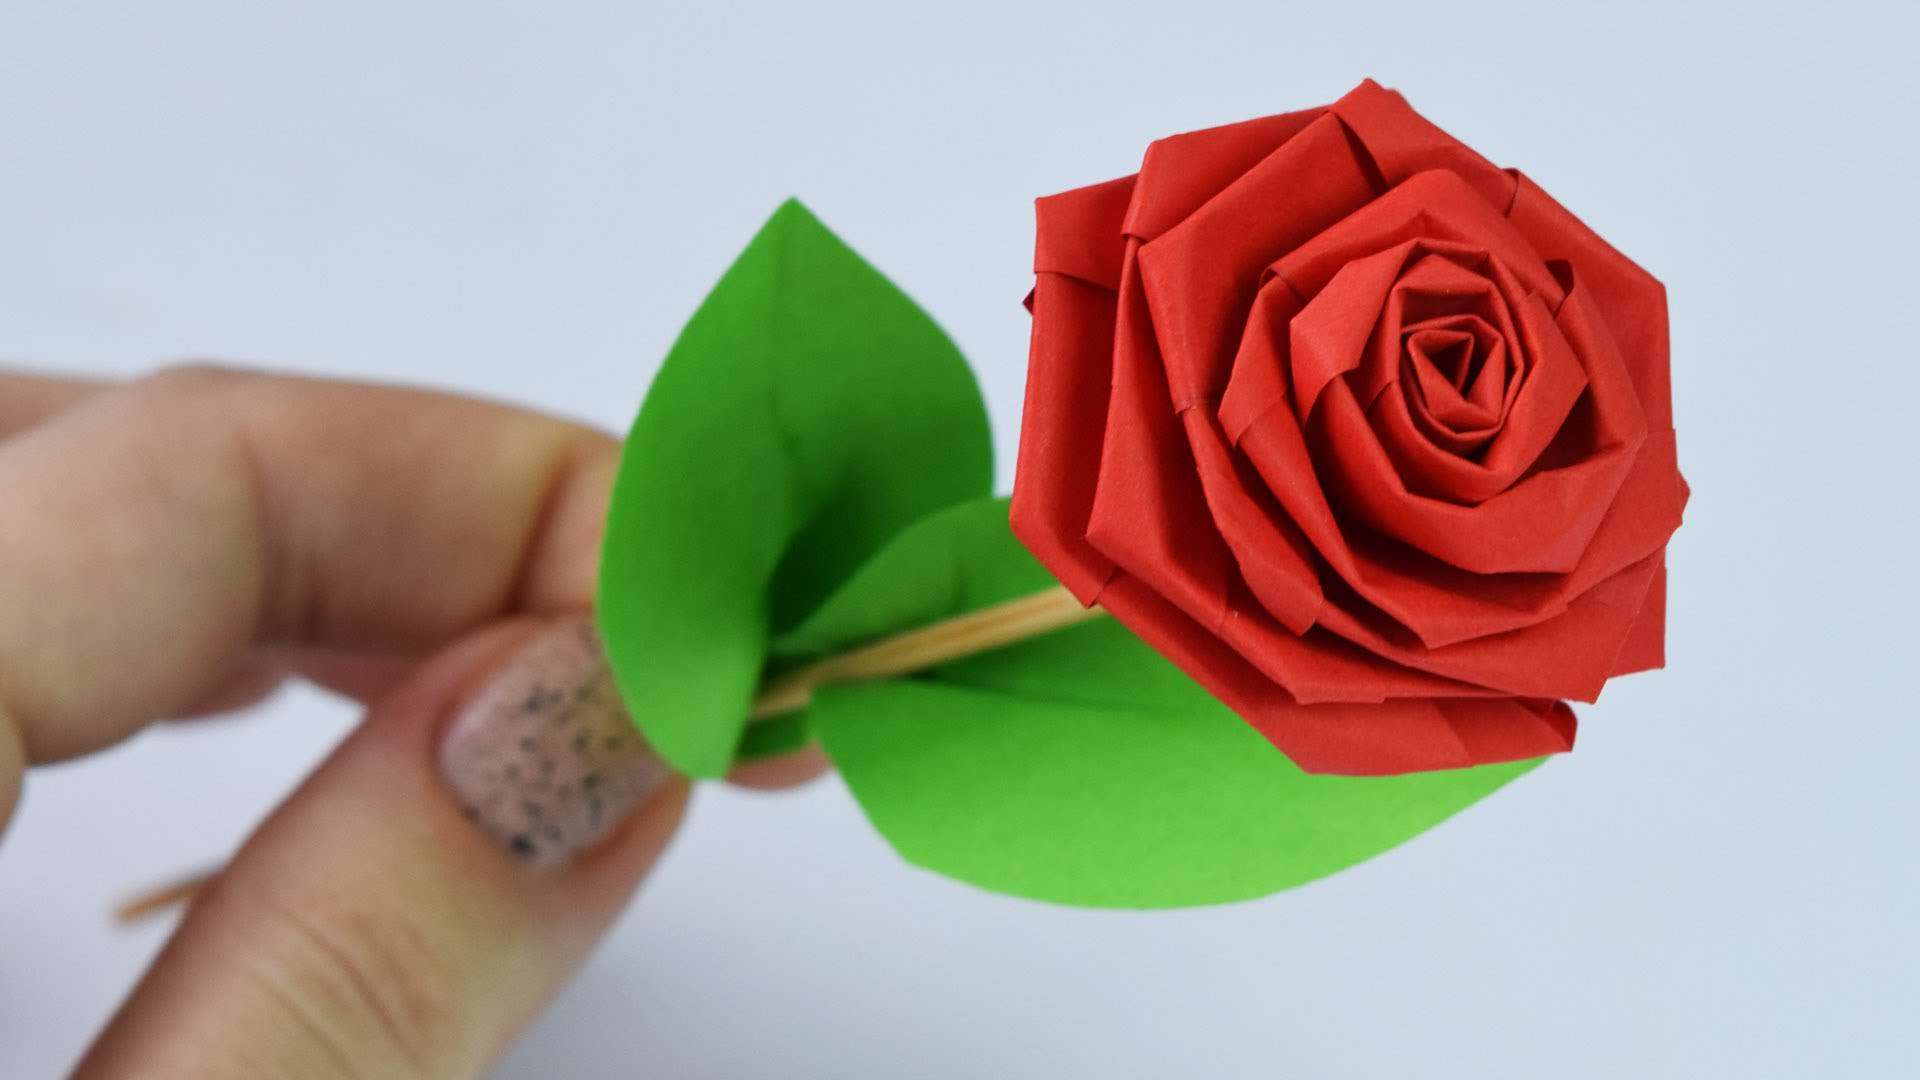 How To Make An Origami Rose Easy Origami Rose How To Make A Origami Rose Easy Step Step